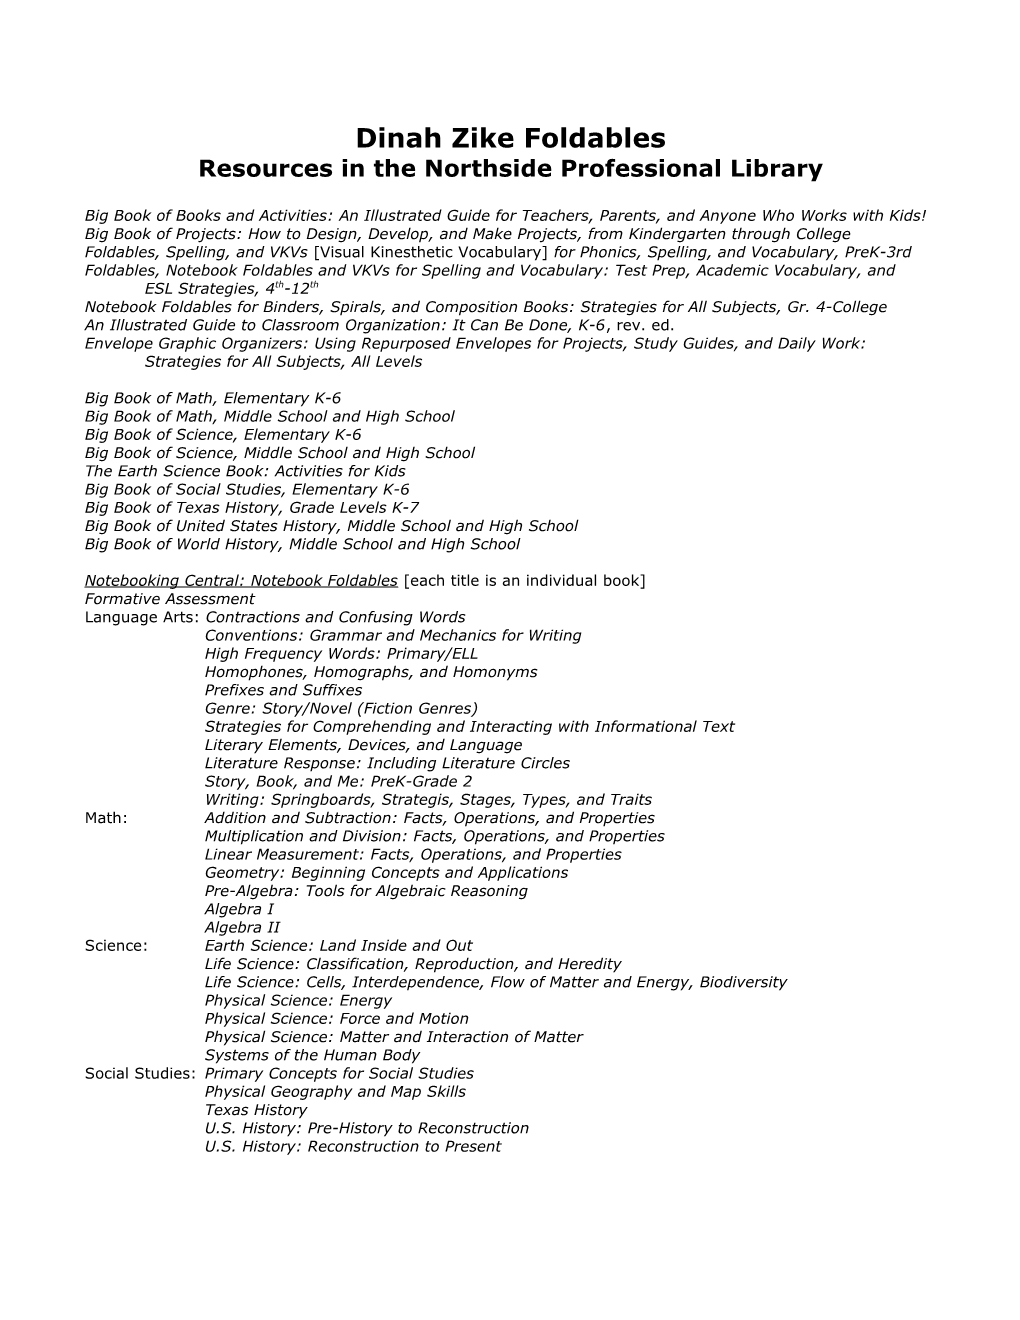 Resources in the Northside Professional Library